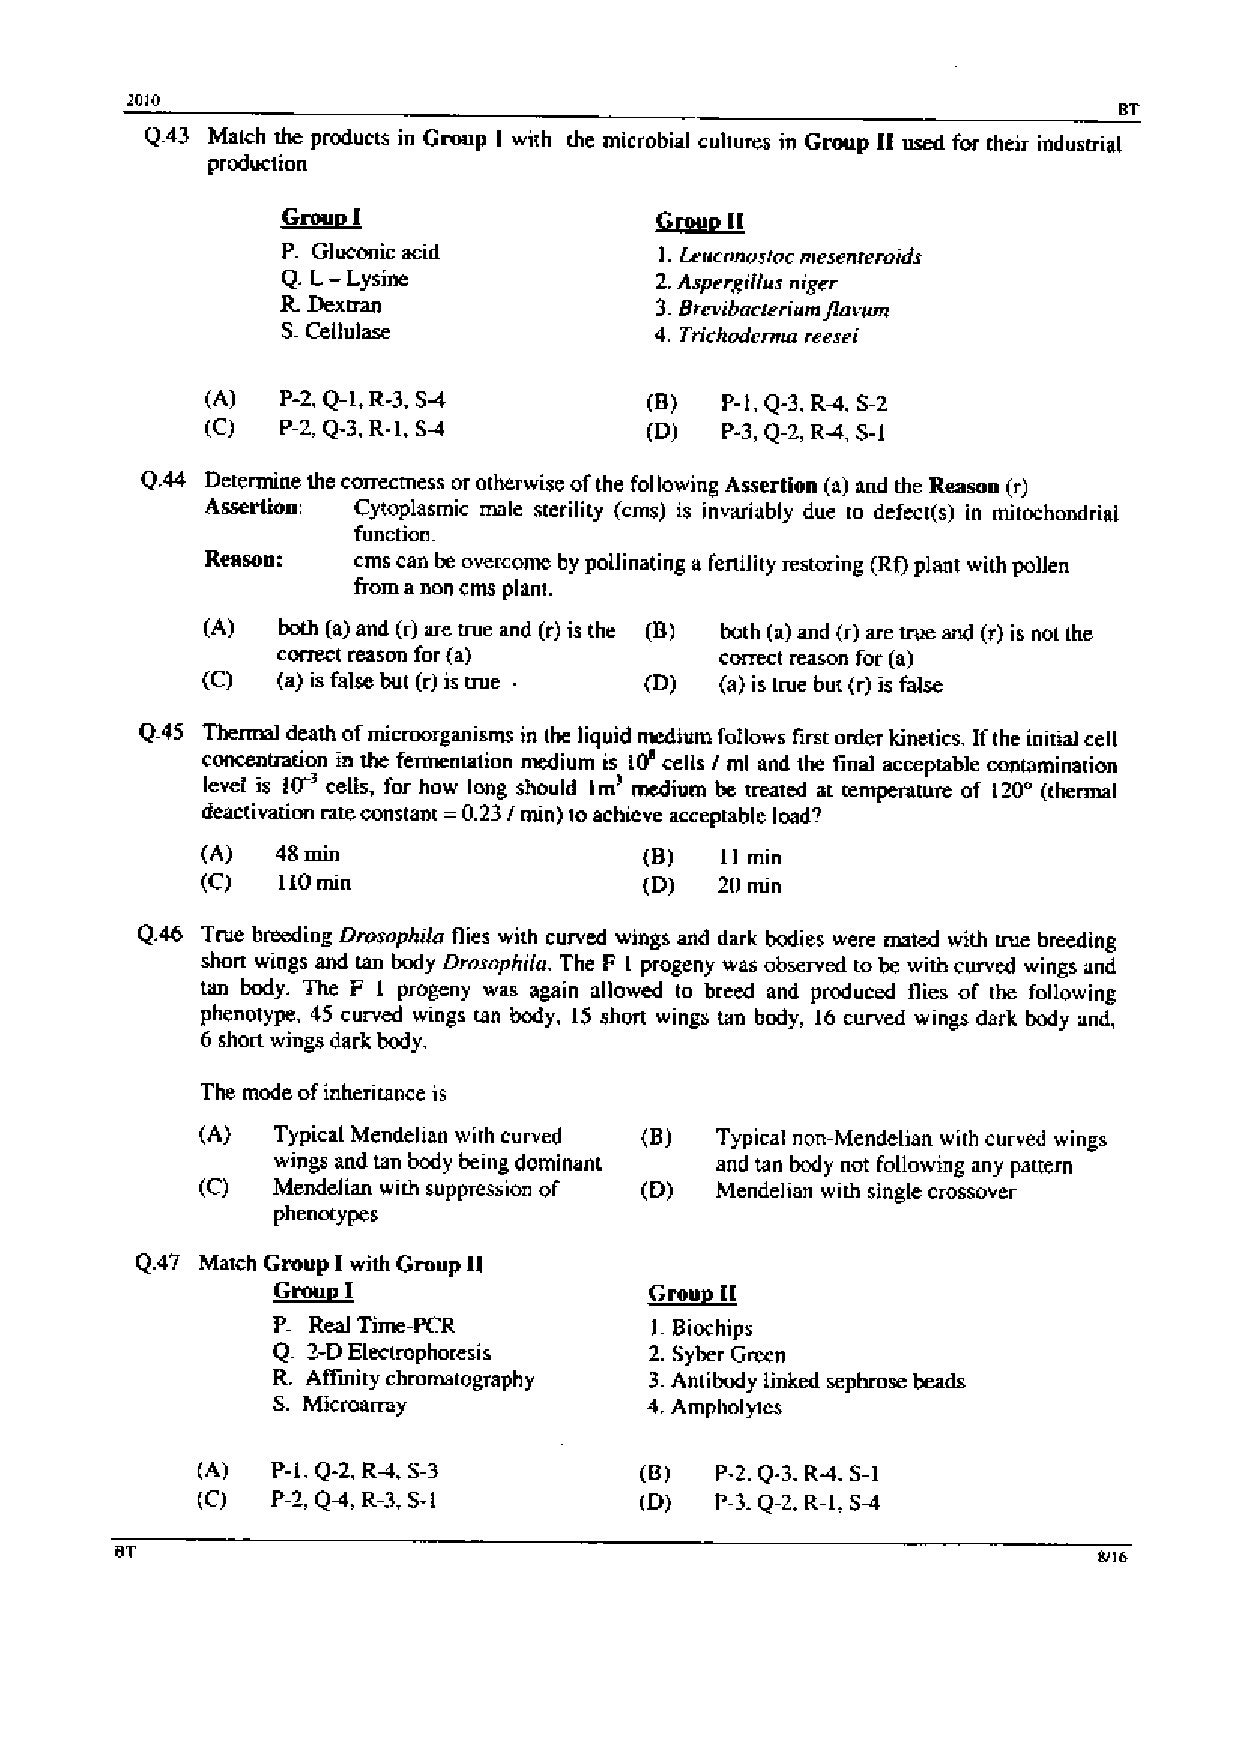 GATE Exam Question Paper 2010 Biotechnology 8